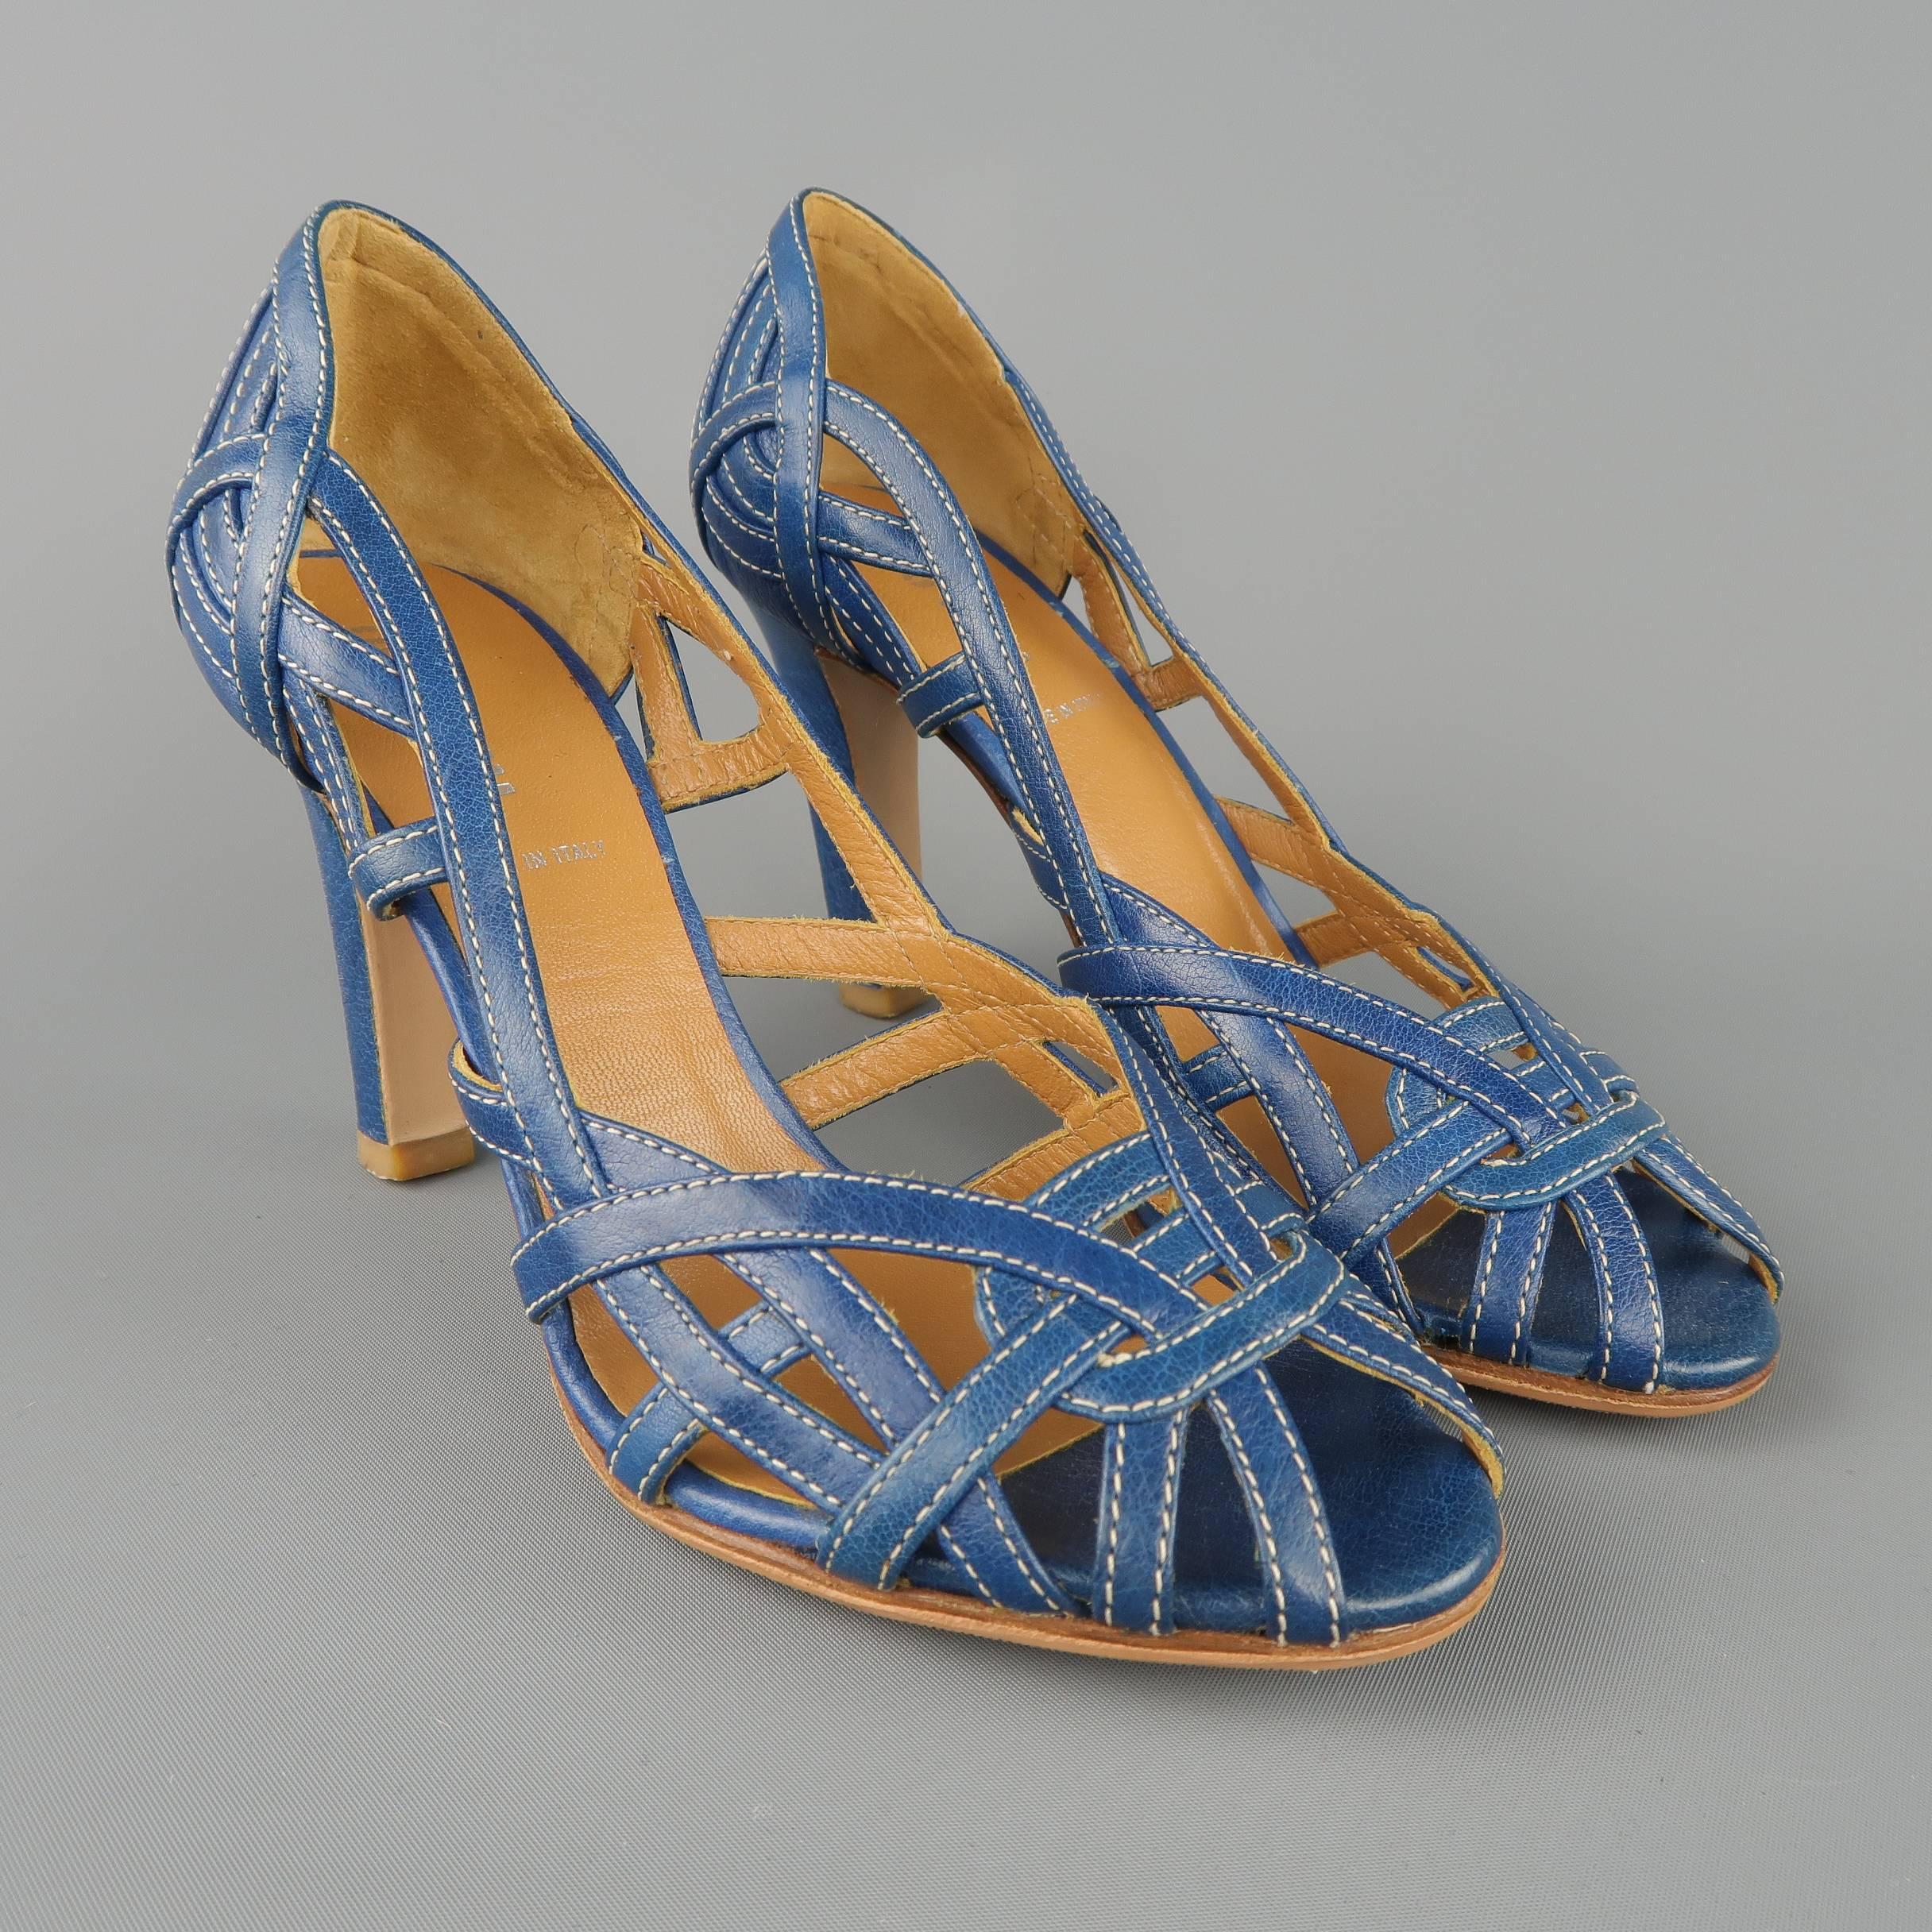 MIU MIU pumps come in woven blue straps with contrast stitching with a peep toe and covered heel. Made in Italy.
 
Excellent Pre-Owned Condition.
Marked: IT 35.5
 
Measurements:
 
Heel: 3.25 in.
